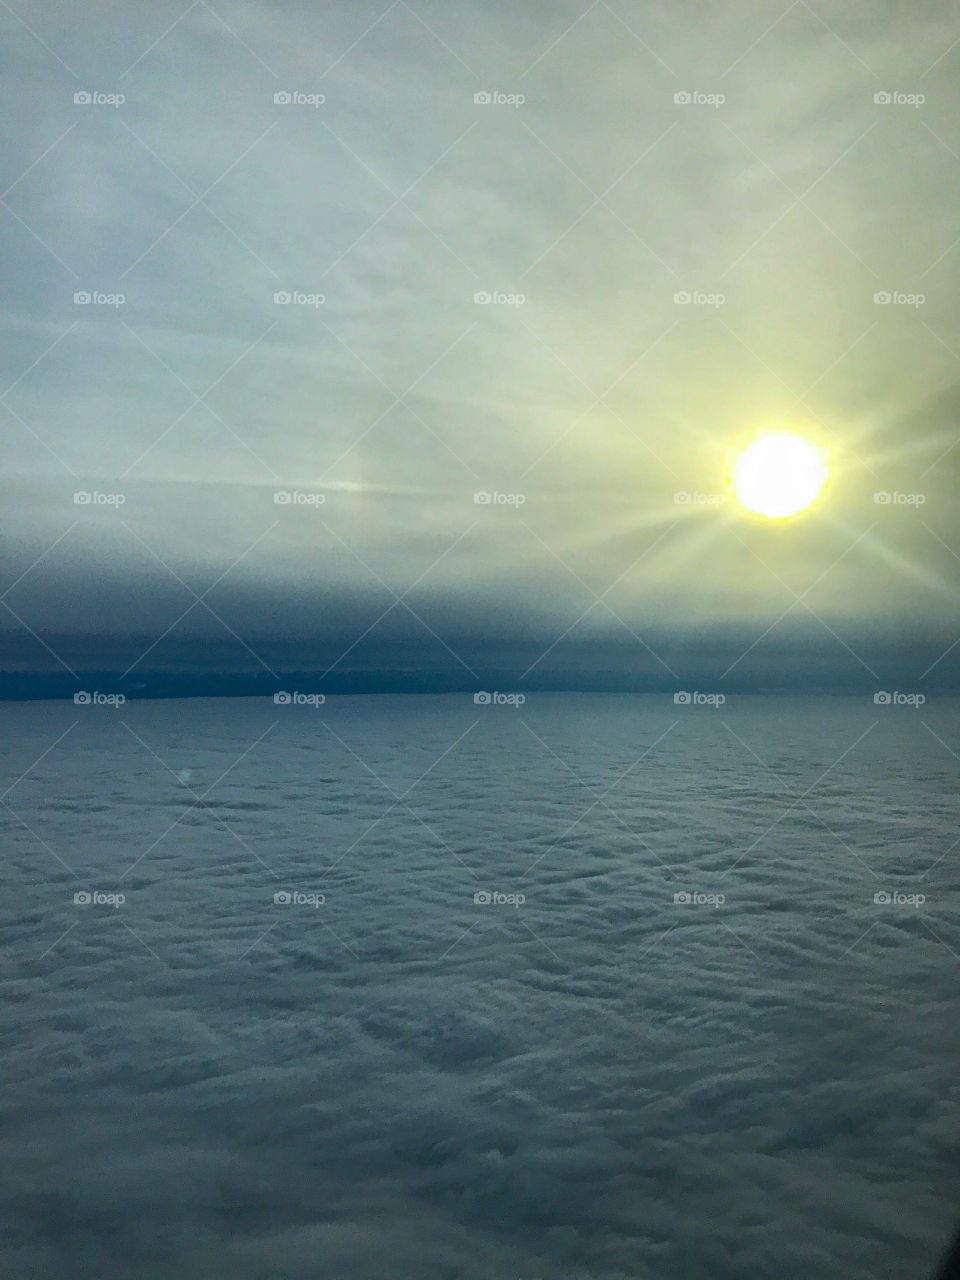 “Above the Clouds” A quilt made of clouds above the city of Bangalor, India. This photo captured with an Iphone 7 camera during winter from and airplane